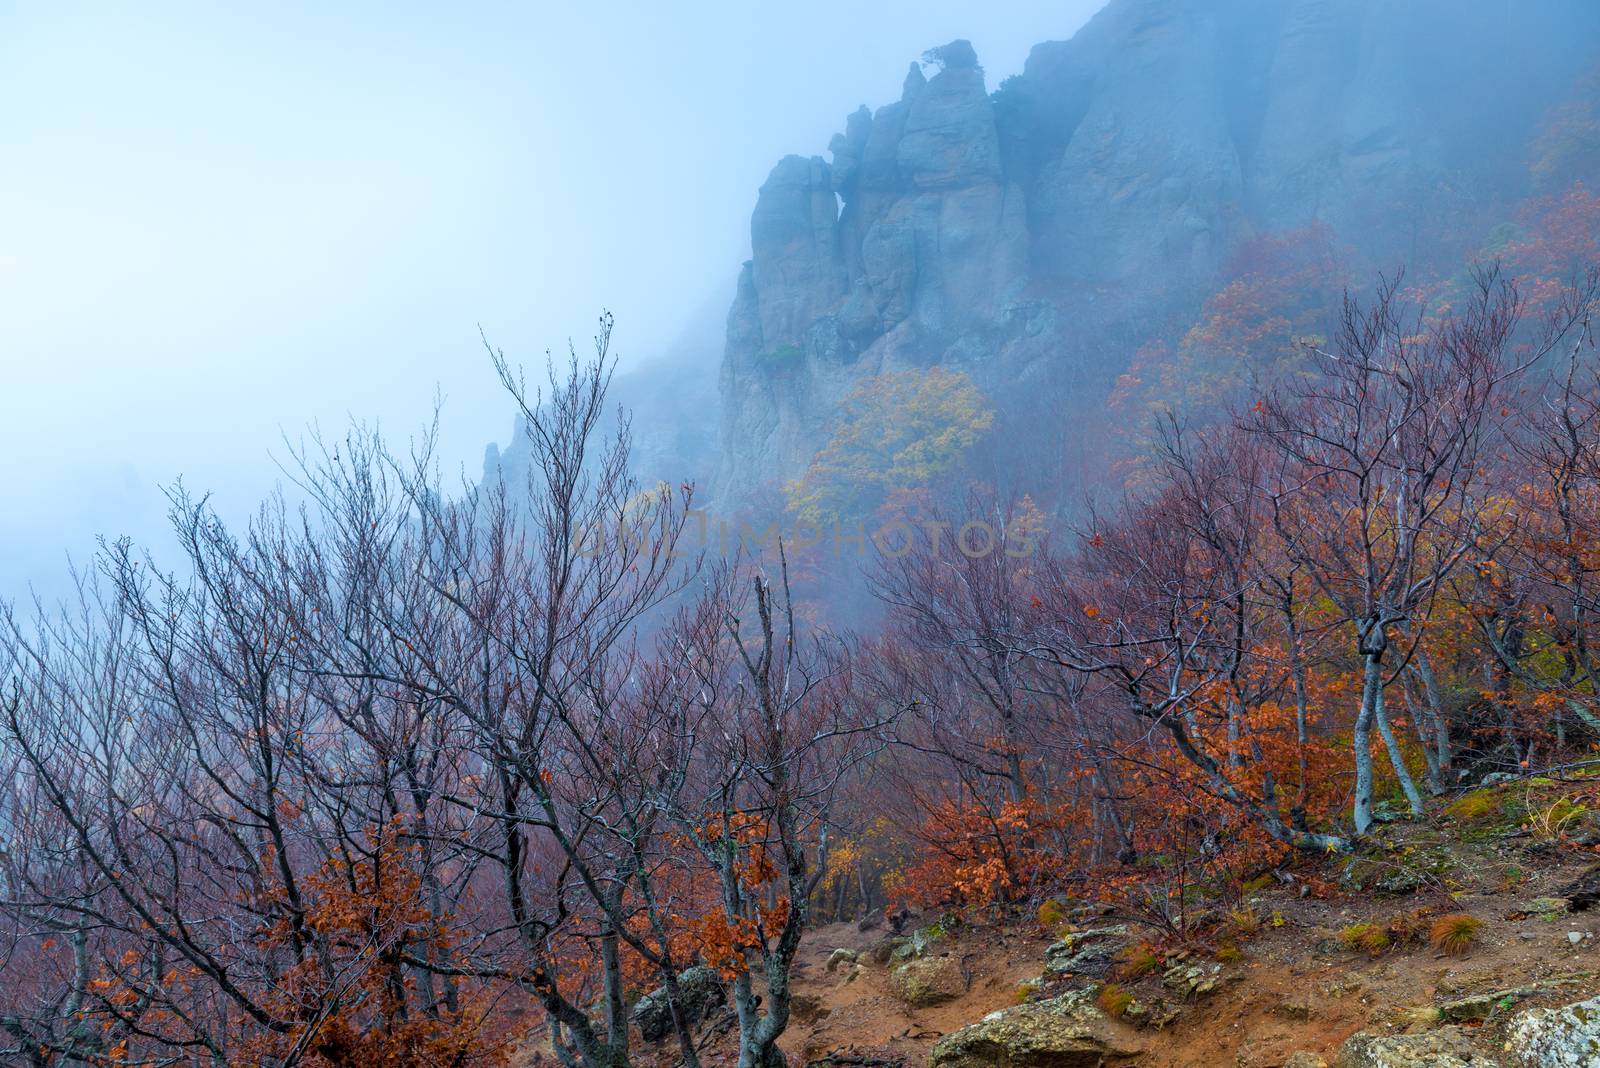 Beautiful mountains, view of bare trees and rocks, autumn landscape in the fog